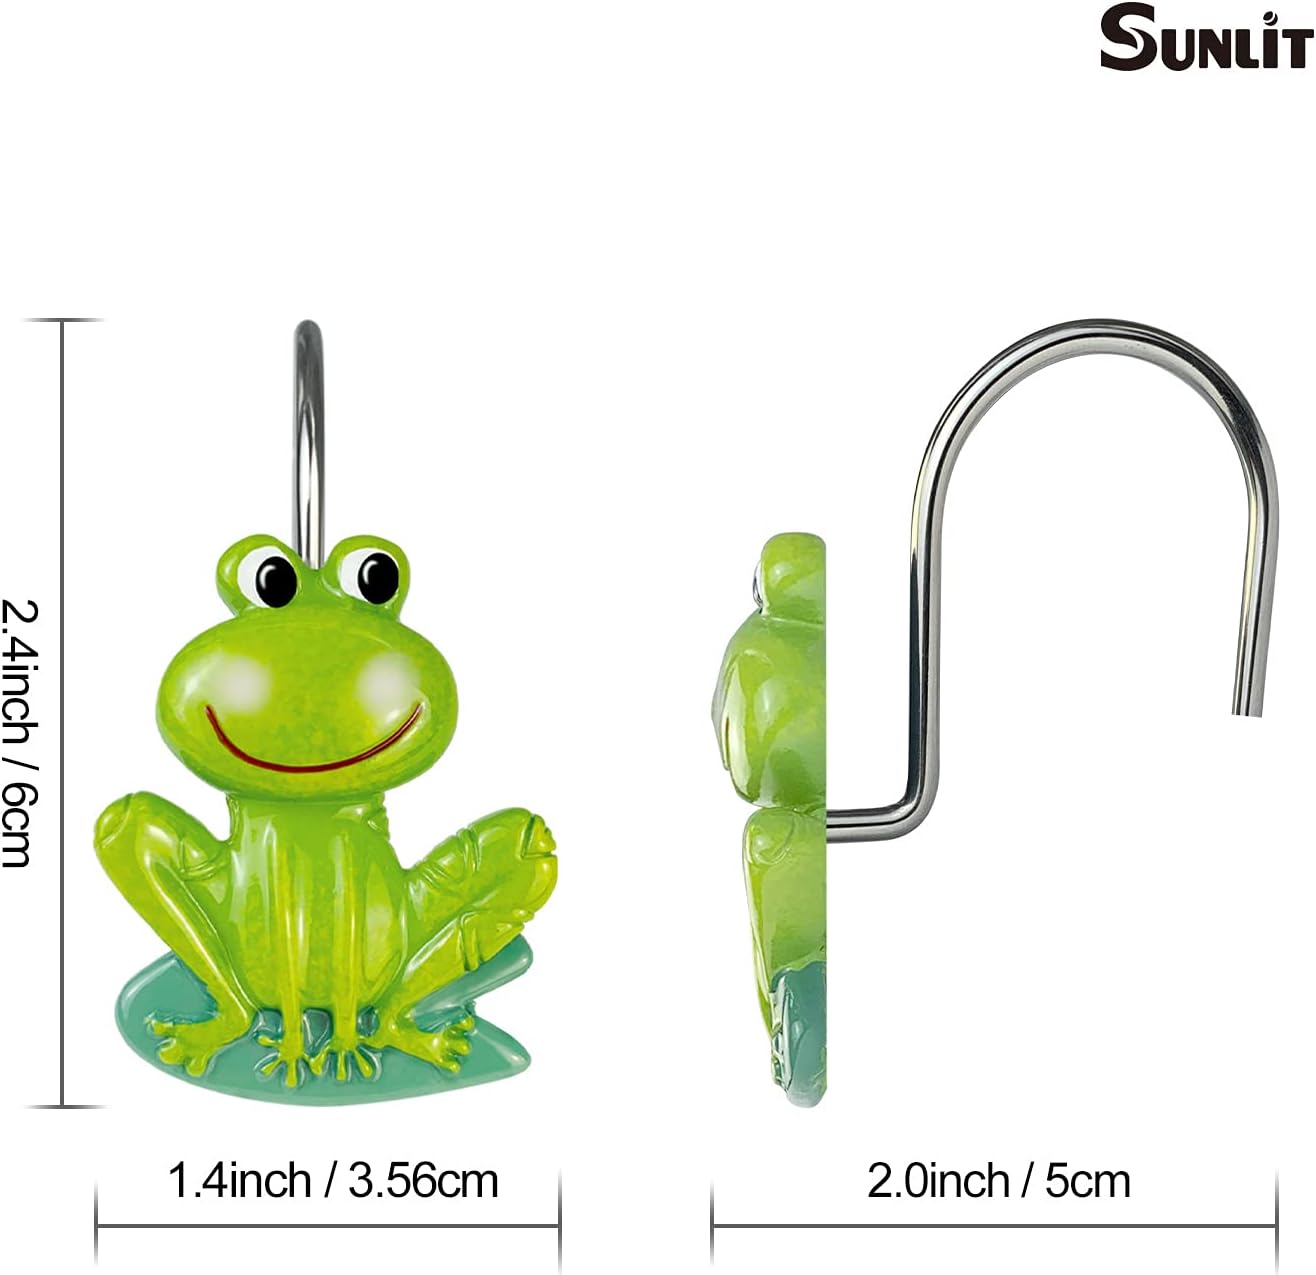 Sunlit Rustic Decorative Shower Curtain Hooks for Kids, Frog Shower Curtain Rings, Cabin Green Shower Curtain Hooks, Resin, Farmhouse Bathroom Decoration for Kids- 12 Pack